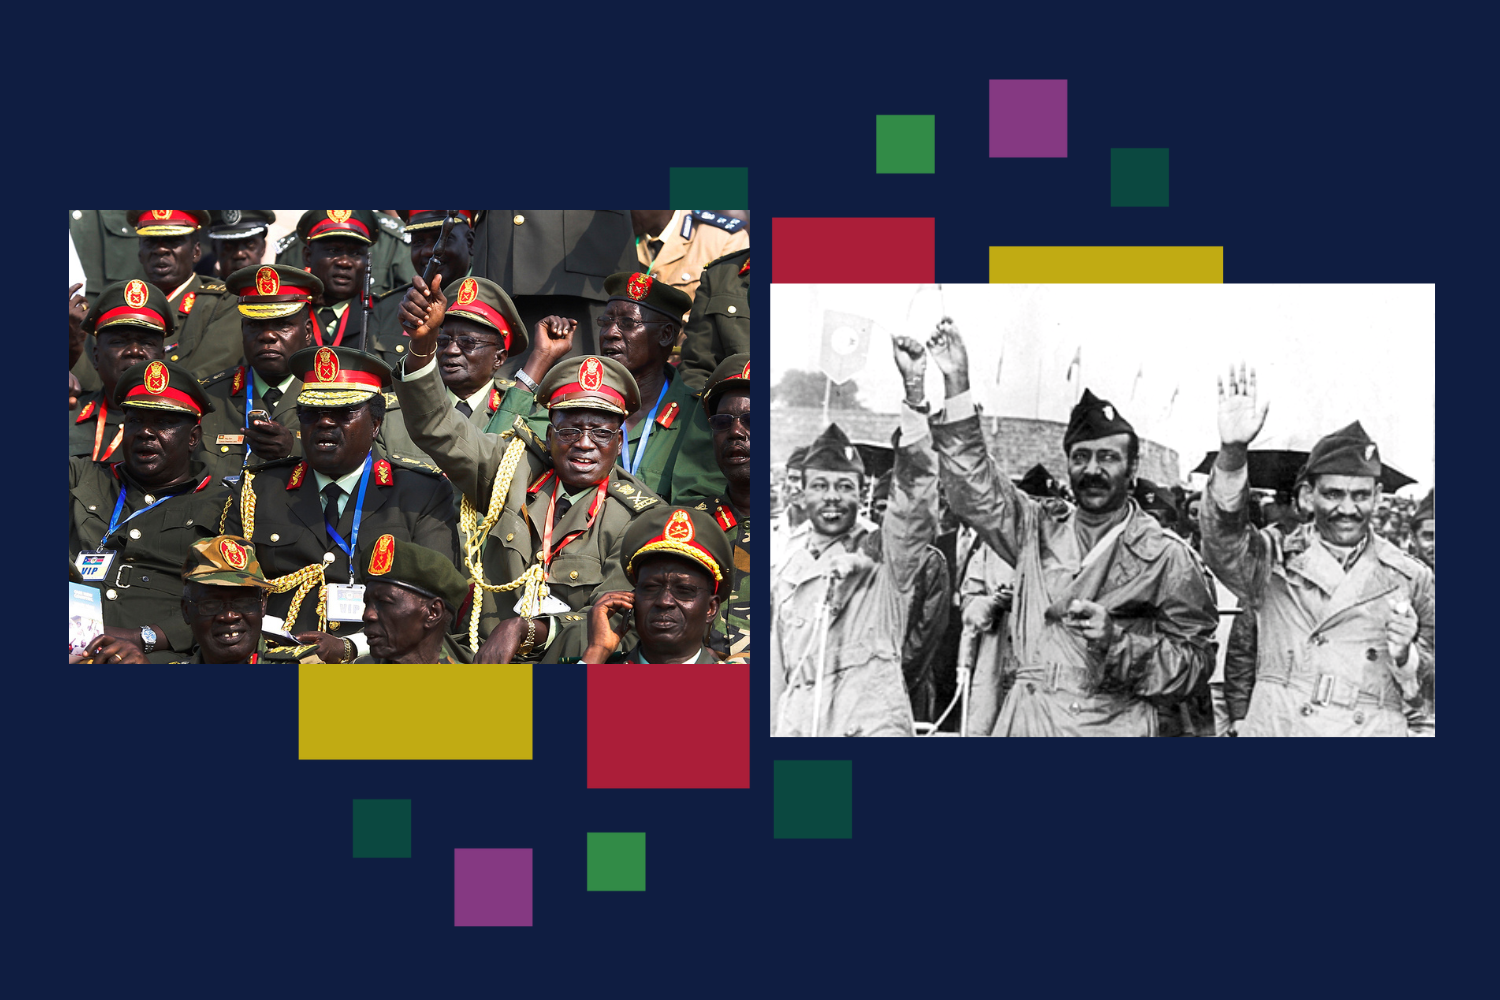 Photographs of 1) high-ranking SPLA officers at the South Sudan independence celebrations in 2011, and 2) Ethiopia's Colonel Mengistu Haile Mariam with senior Derg members Tafari Benti and Atnafu Abate in 1974.